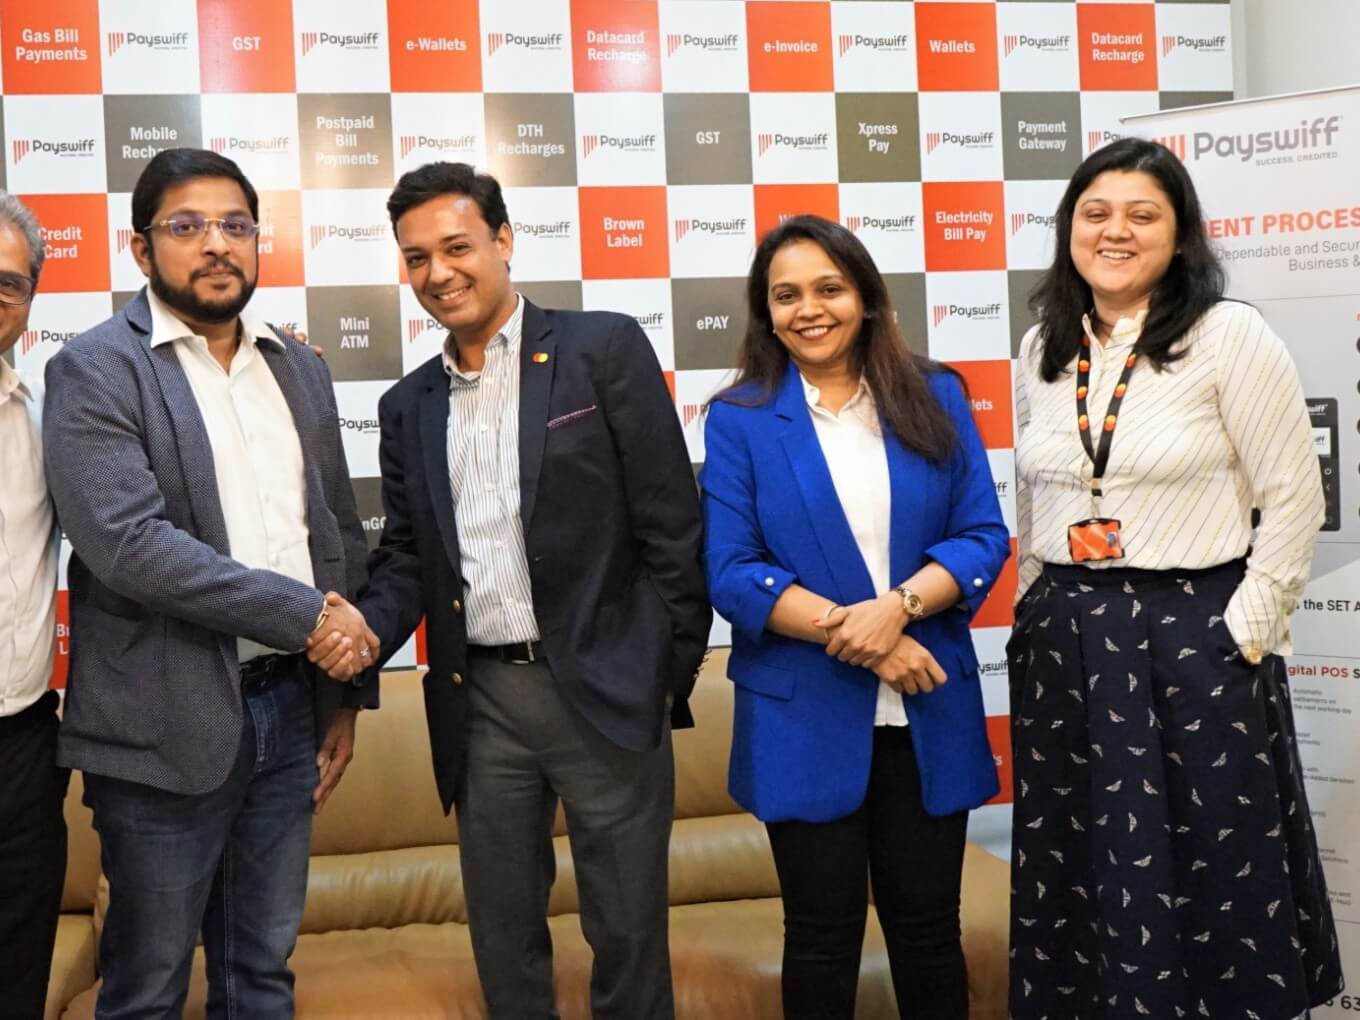 Payswiff And Mastercard Partner to Accelerate Digital Payments In Tier 2 And 3 Cities